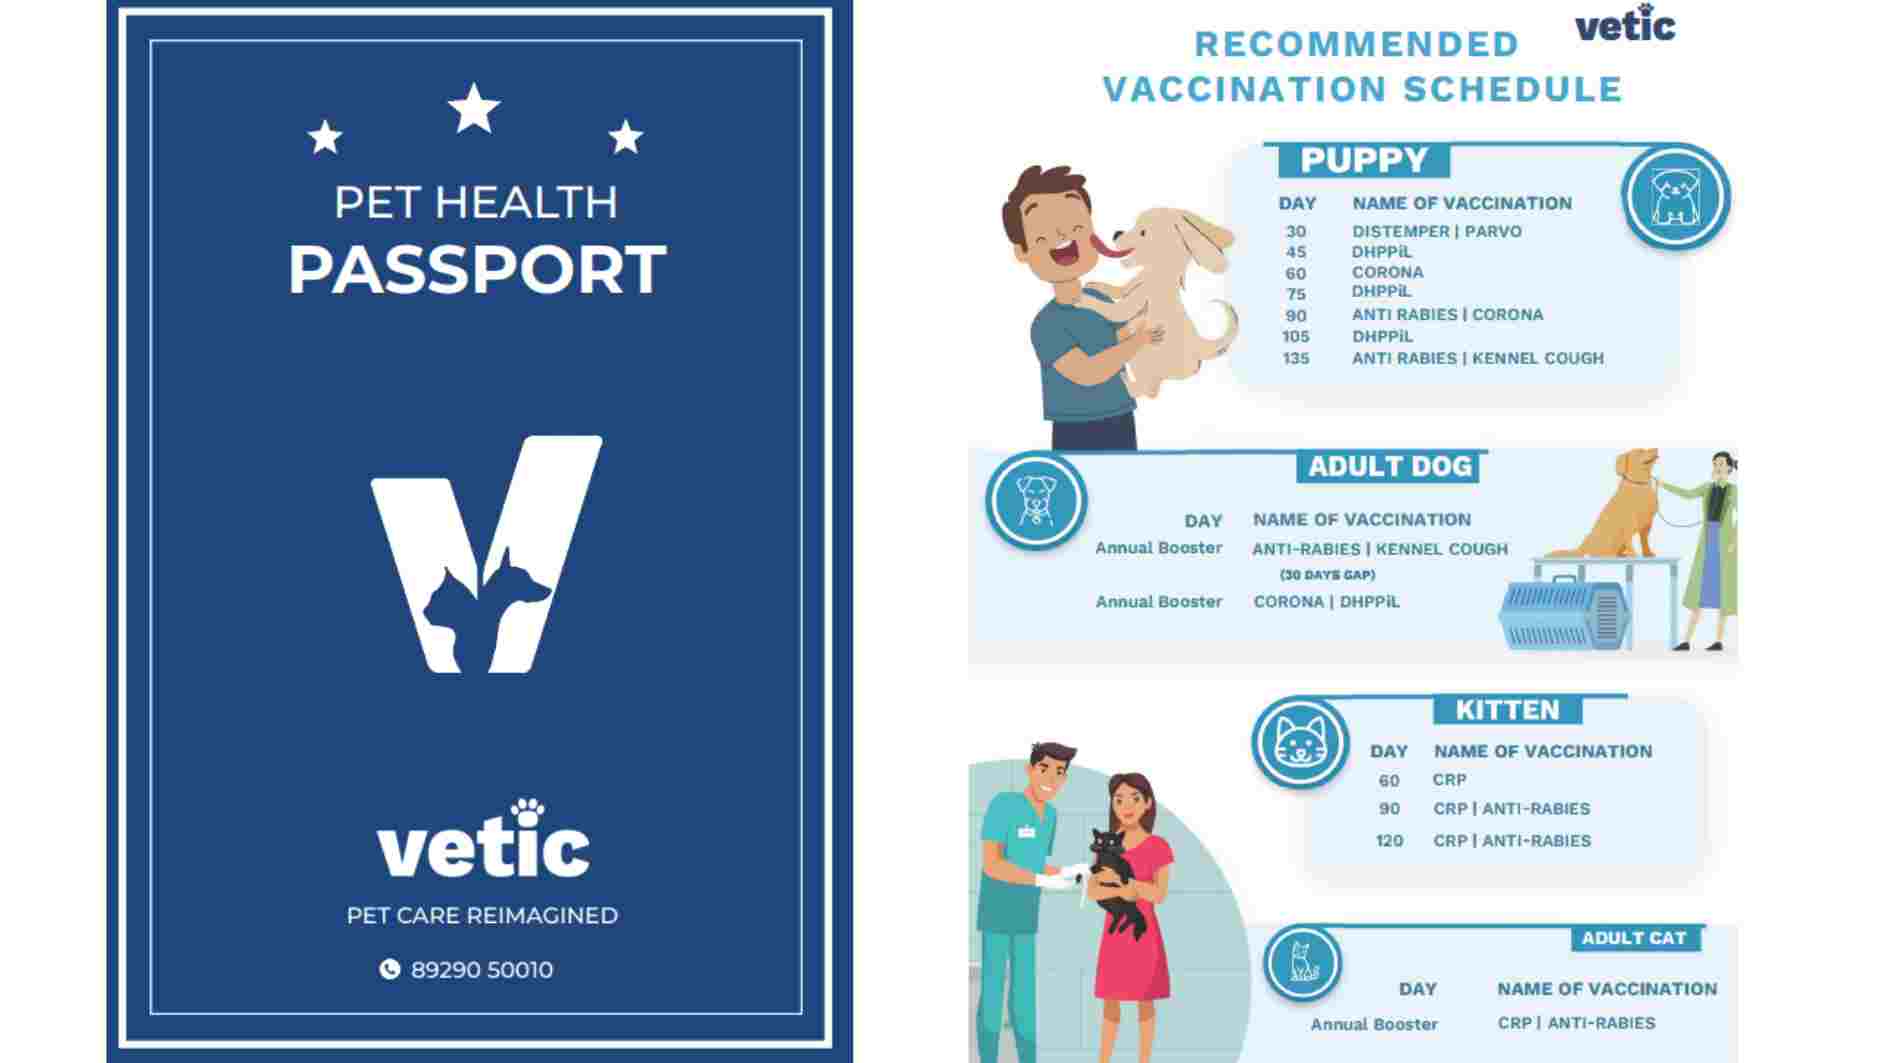 The left side of the image displays a “PET HEALTH PASSPORT” issued by Vetic. The pet vaccination record cum health passport cover is dark blue with white text and stars at the top. Below the cover illustration, there’s an image of a person holding a dog, both smiling. The Vetic logo, represented by a stylized “V,” is prominently displayed in white. Beneath the logo, it reads “PET CARE REIMAGINED”, and a contact number “89290 50010” is provided. On the right side, there’s a “RECOMMENDED VACCINATION SCHEDULE” also by Vetic: It’s divided into sections for puppies, adult dogs, kittens, and adult cats. Each section lists the recommended vaccinations and the days post-birth or annual boosters when they should be administered. Here are some details from the schedule: Puppy Vaccination Schedule: Day 45: DISTEMPER | PARVO Day 60: DISTEMPER | PARVO | CORONA Day 75: DHPPiL+LEPTO | CORONA Day 90: ANTI-RABIES | CORONA Day 105: DHPPiL+LEPTO | KENNEL COUGH Adult Dog Annual Booster: ANTI-RABIES | KENNEL COUGH DHPPiL+LEPTO CORONA Kitten Vaccination Schedule: Day 60: FVRCP Day 70: FVRCP | ANTI-RABIES Day 100: FVRCP | ANTI-RABIES Adult Cat Annual Booster: FVRCP | ANTI-RABIES Remember that this is a general guideline, and individual pet health needs may vary. Always consult your veterinarian for personalized advice.